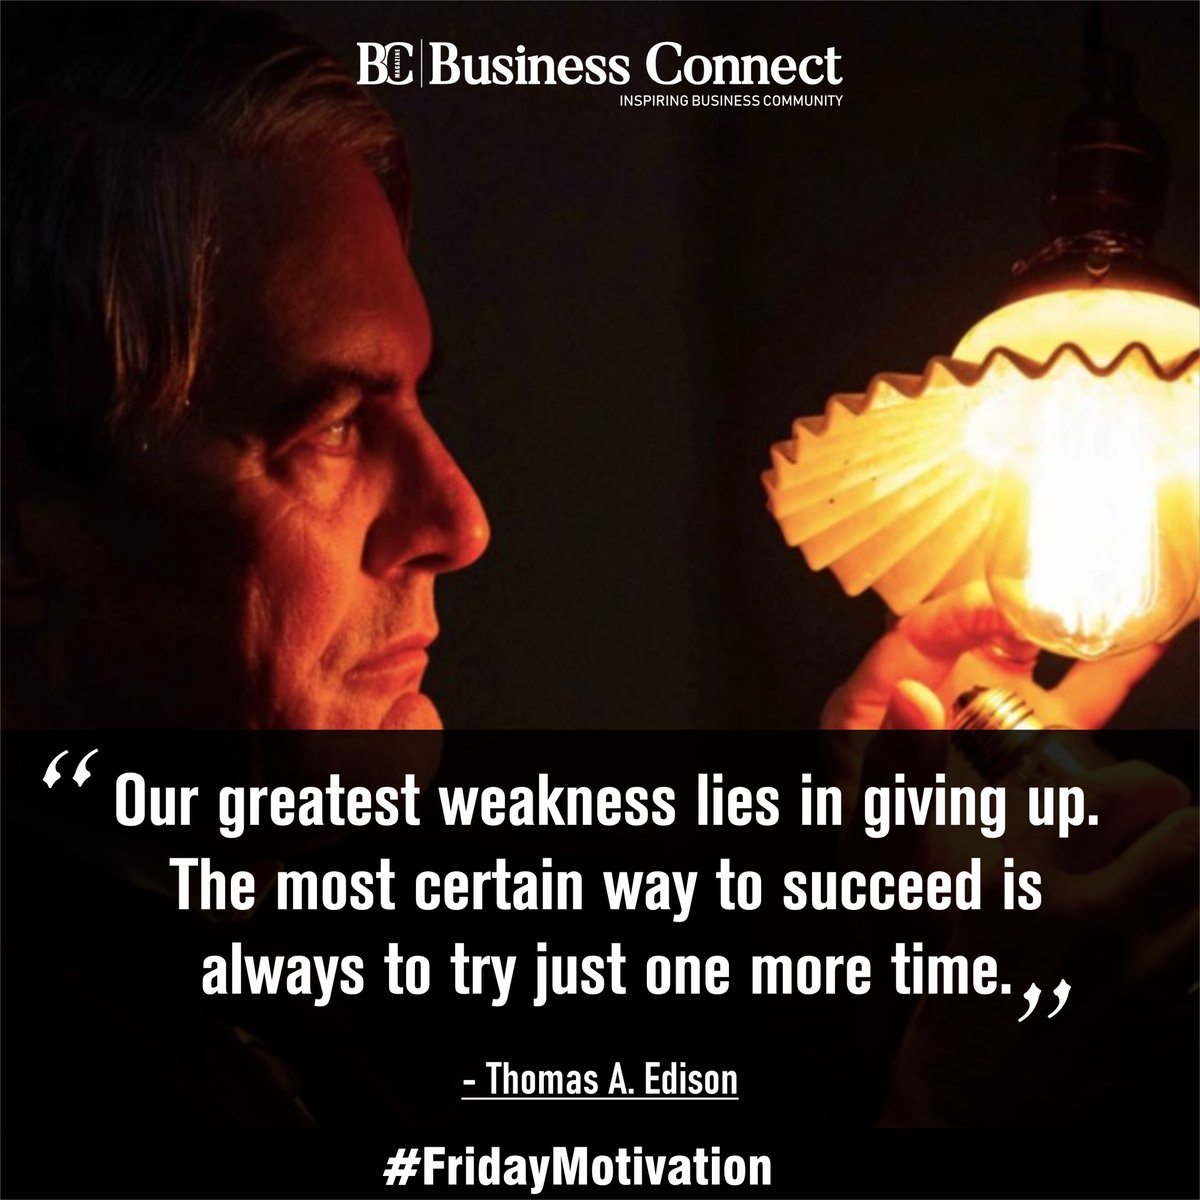 'Our greatest weakness lies in giving up. The most certain way to succeed is always to try just one more time.' - Thomas A. Edison

#ThomasAEdison #ThomasAEdisonquotes #motivationalquotes #Americaninventor #businessman #motivation #quotes #inspiration #inspirationalquotes